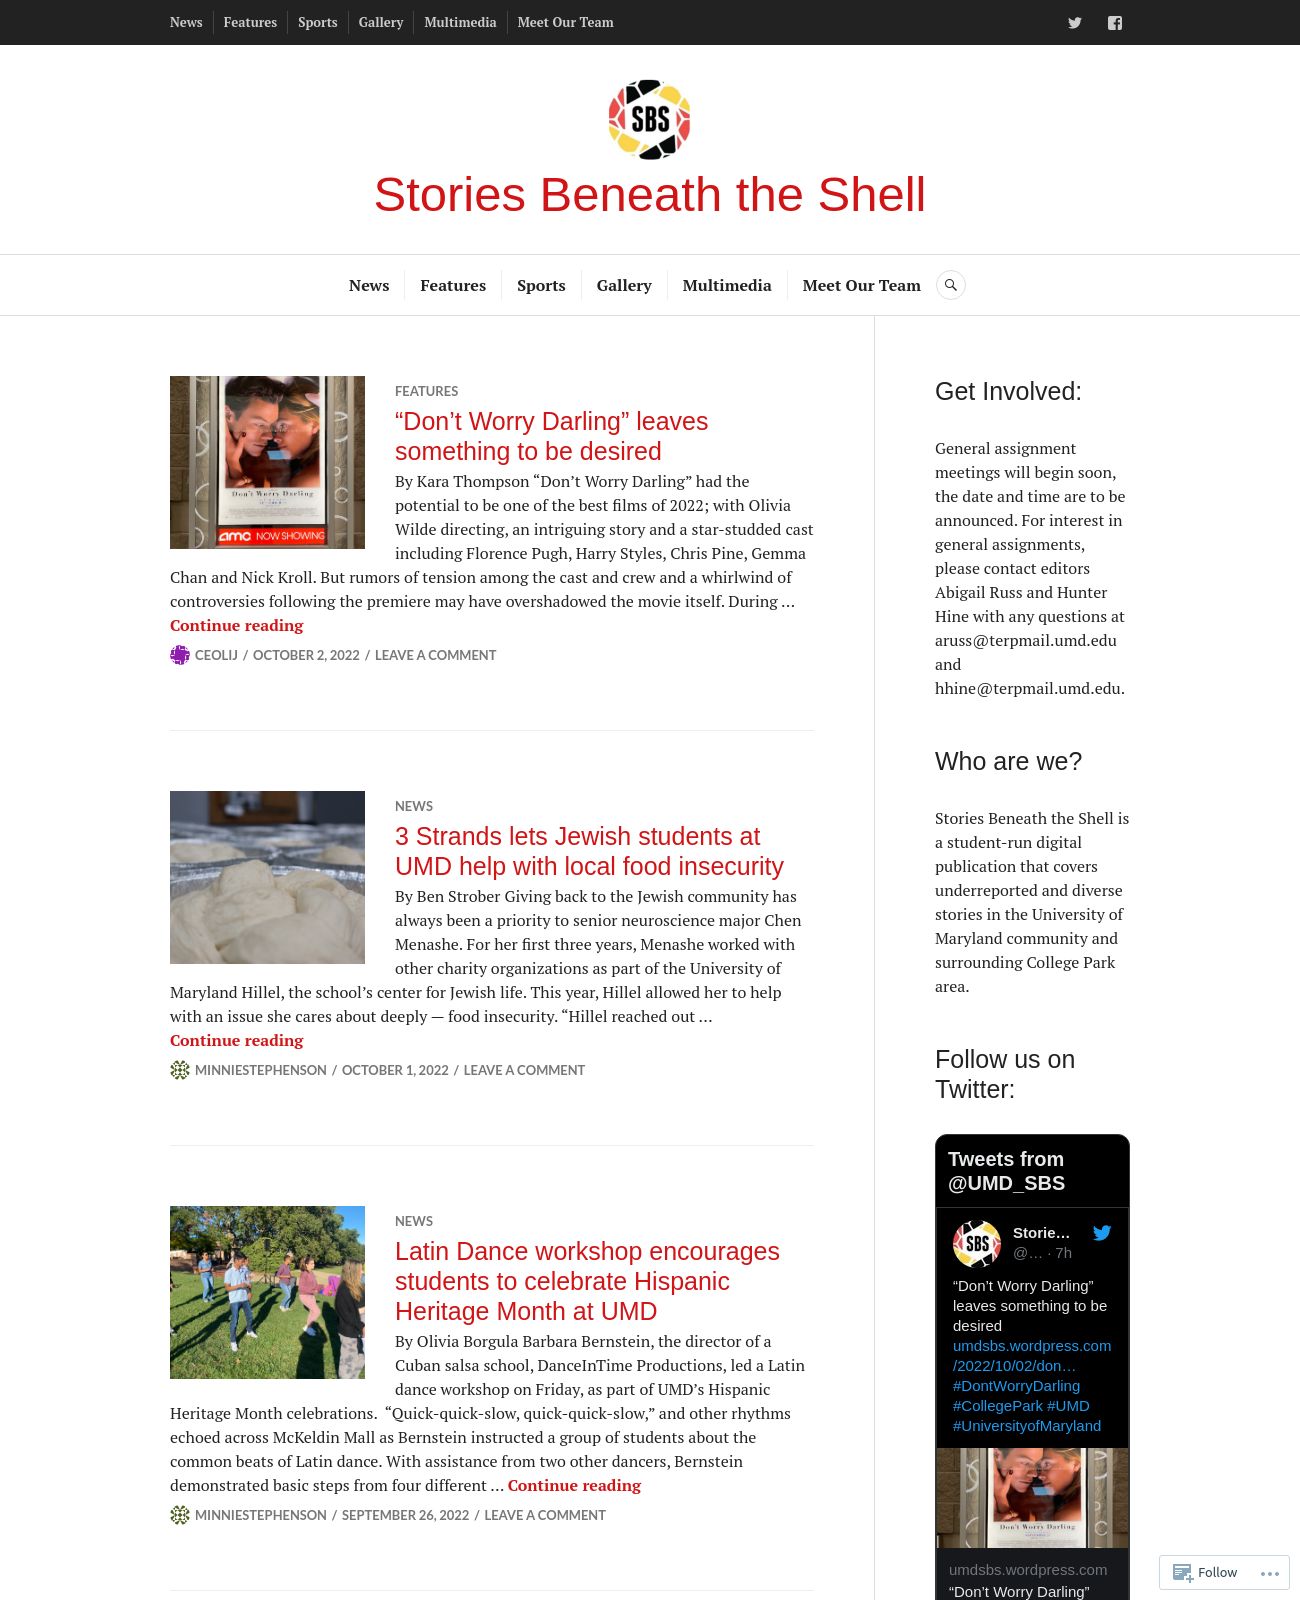 Stories Beneath the Shell at 2022-10-02 23:41:48-04:00 local time